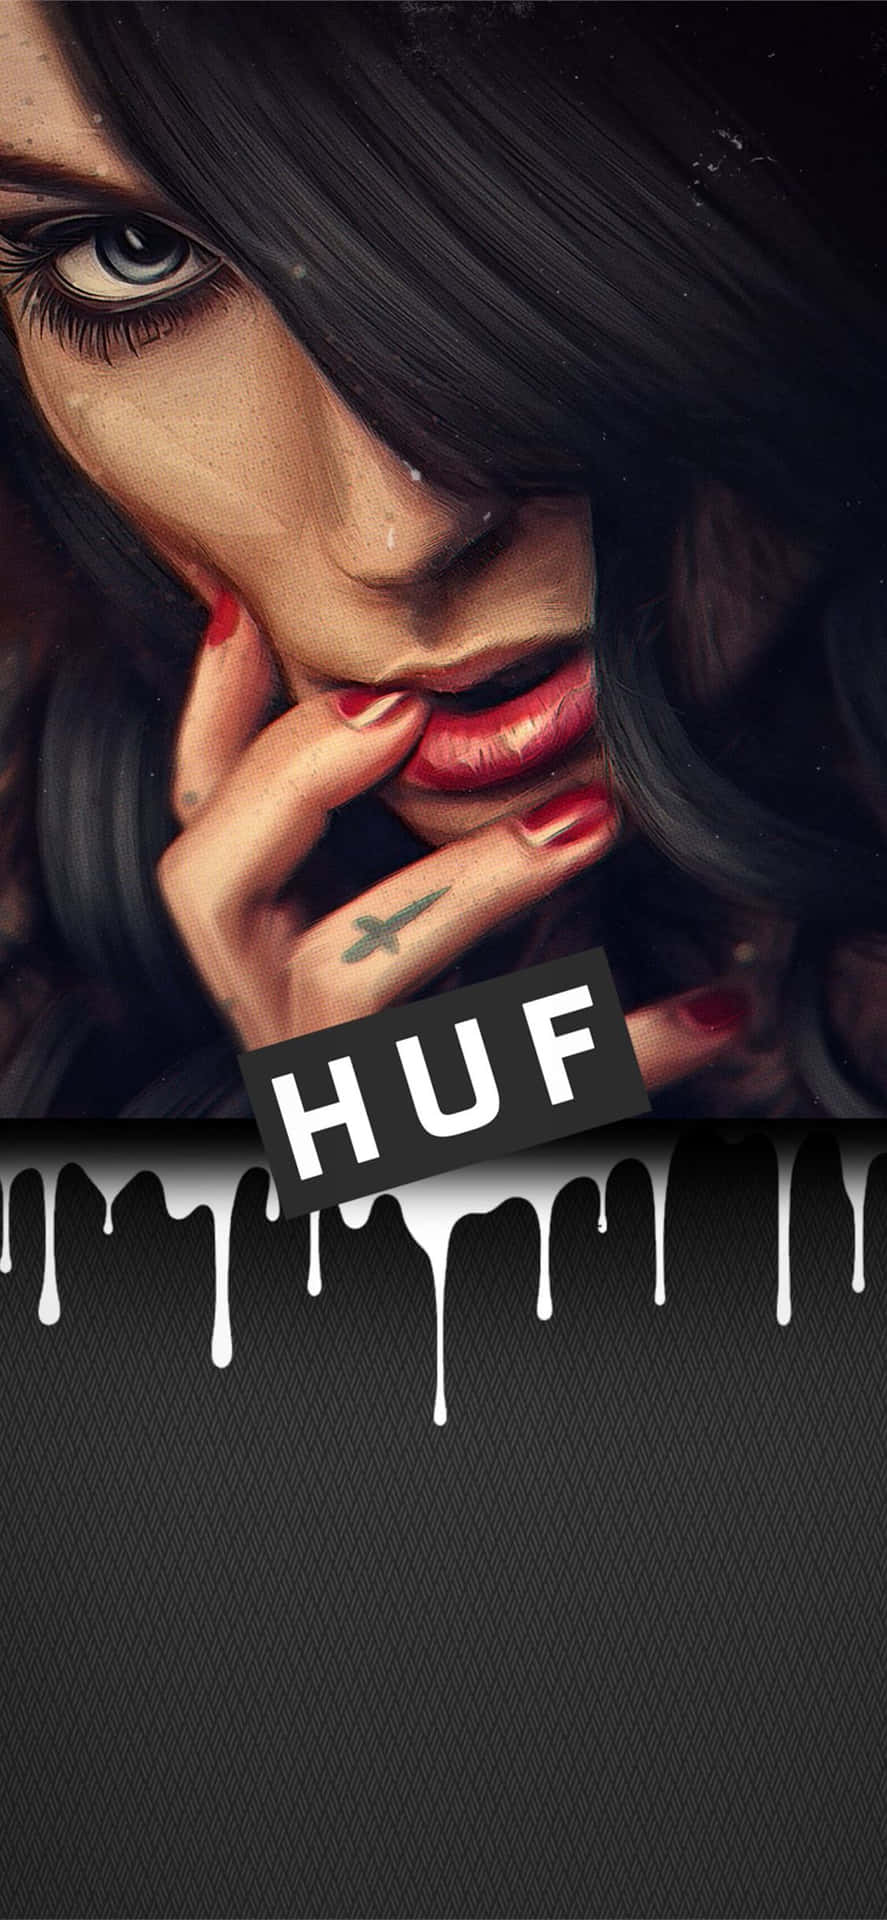 Huf - A Woman With Black Hair And A Black Background Background